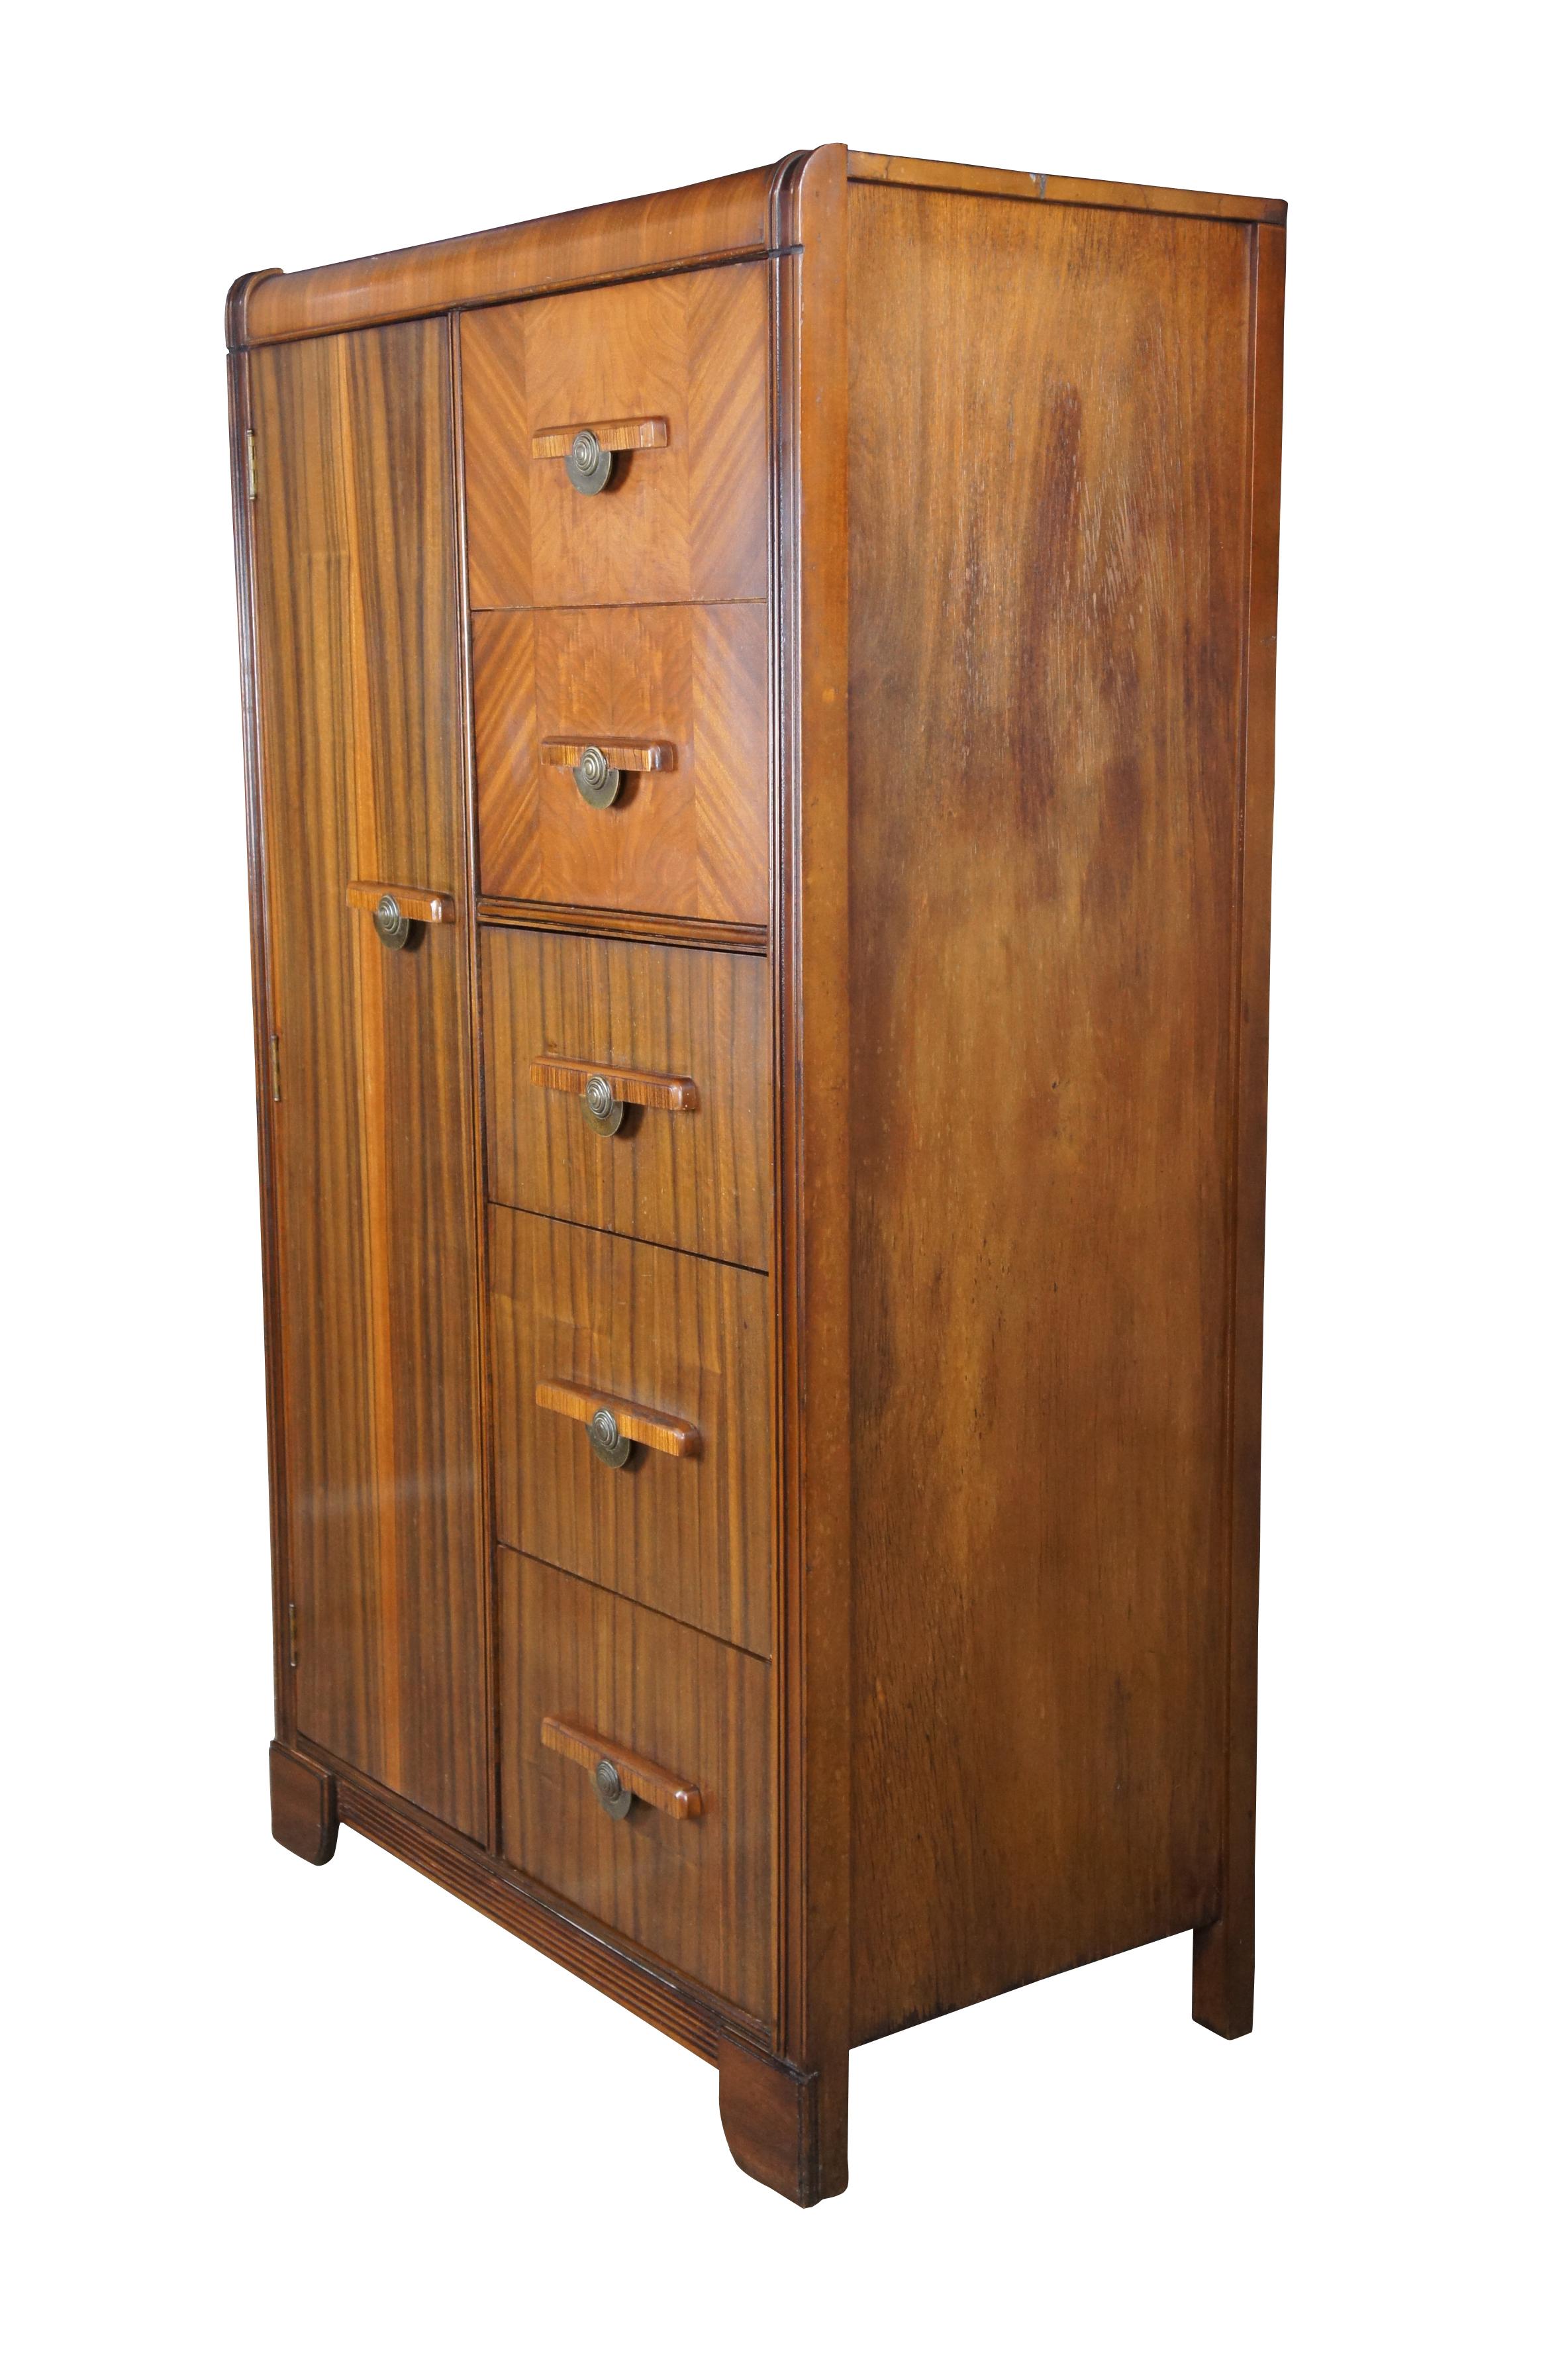 A beautiful Art era chifforobe (also spelled chiffarobe or chifferobe), circa 1920-30s. Made from walnut with a waterfall front, 5 dovetailed drawers and cedar lined closet portion with hanging bar.